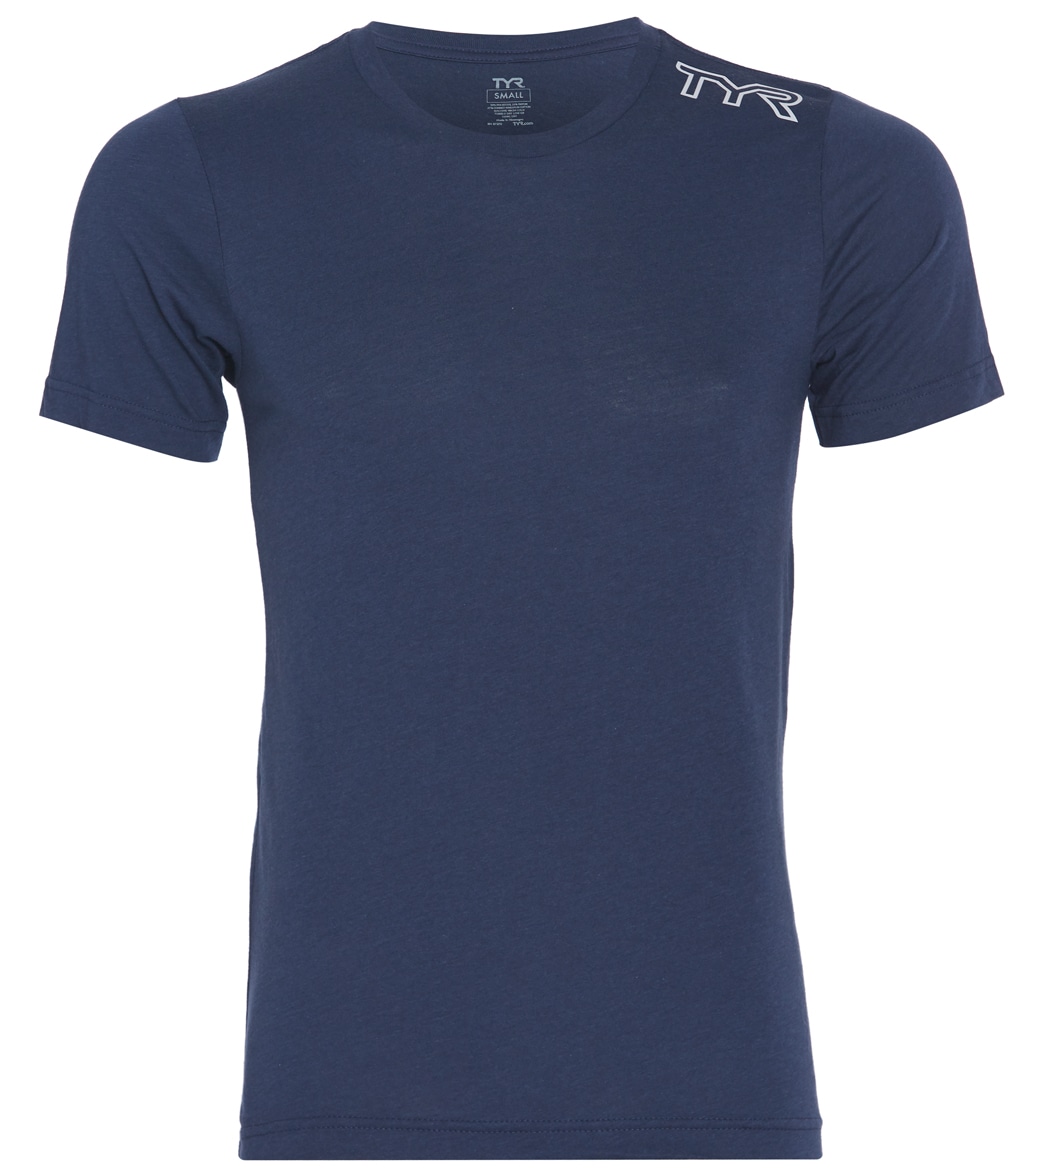 TYR Unisex Triblend Tee Shirt - Navy Large Cotton/Polyester - Swimoutlet.com